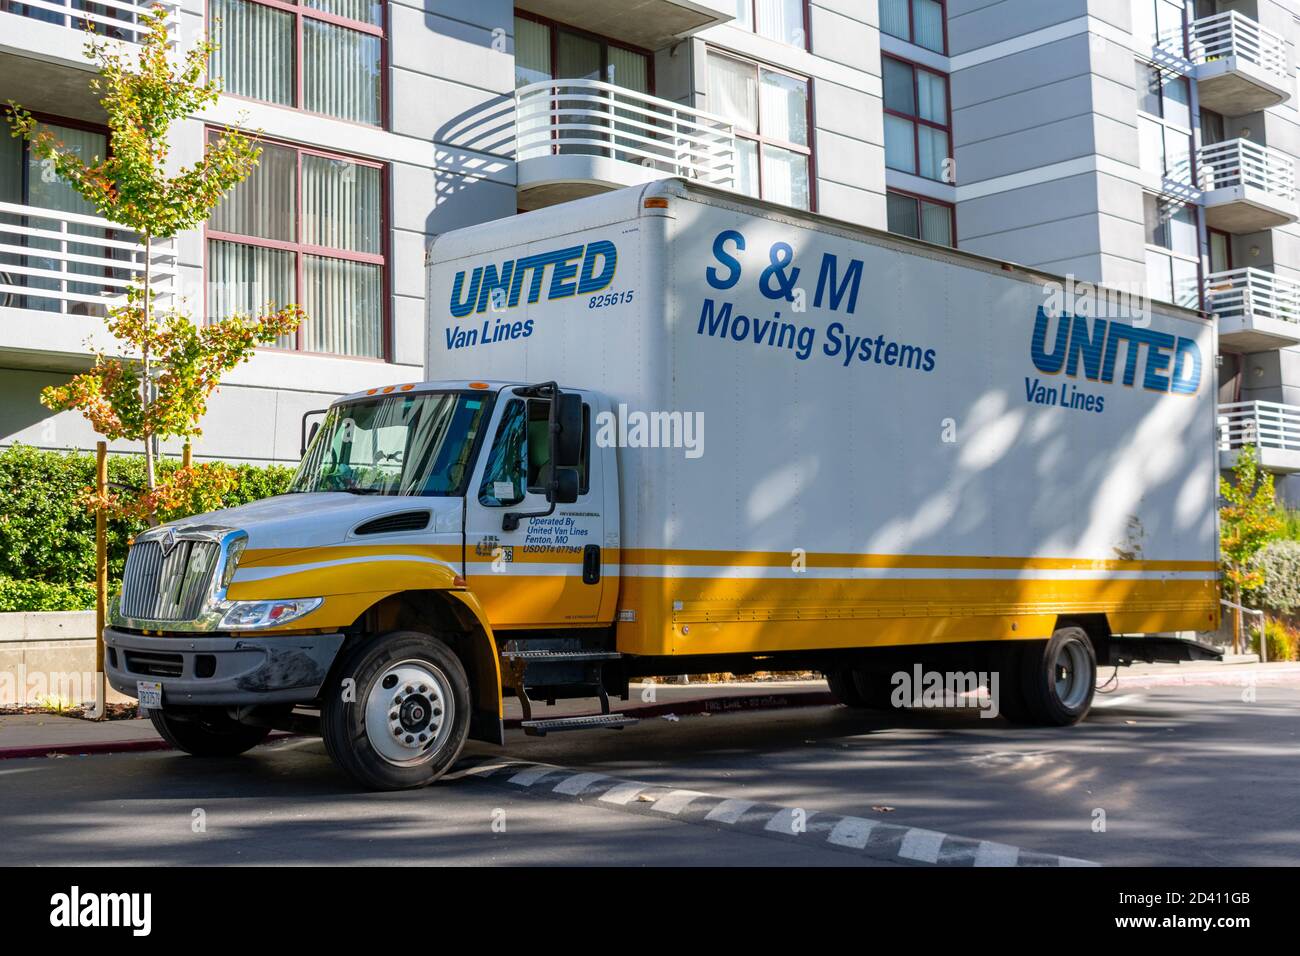 S&M Moving company truck waits for customers in an outdoor parking lot near an apartment. S&M Moving is a certified agent of United Van Lines - San Jo Stock Photo